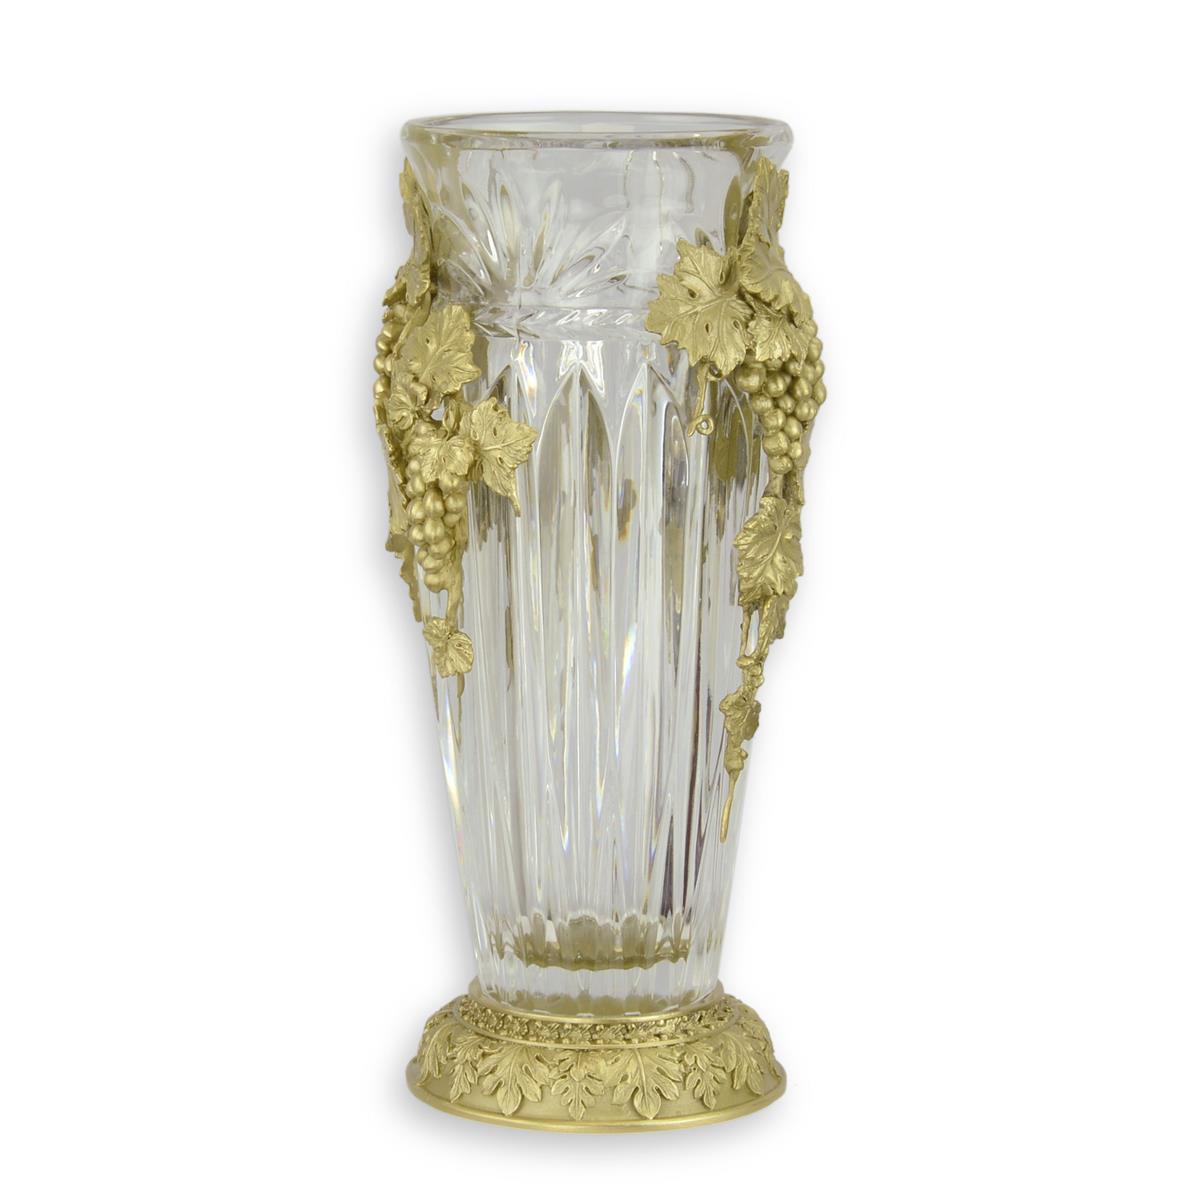 A BRONZE MOUNTED GLASS VASE